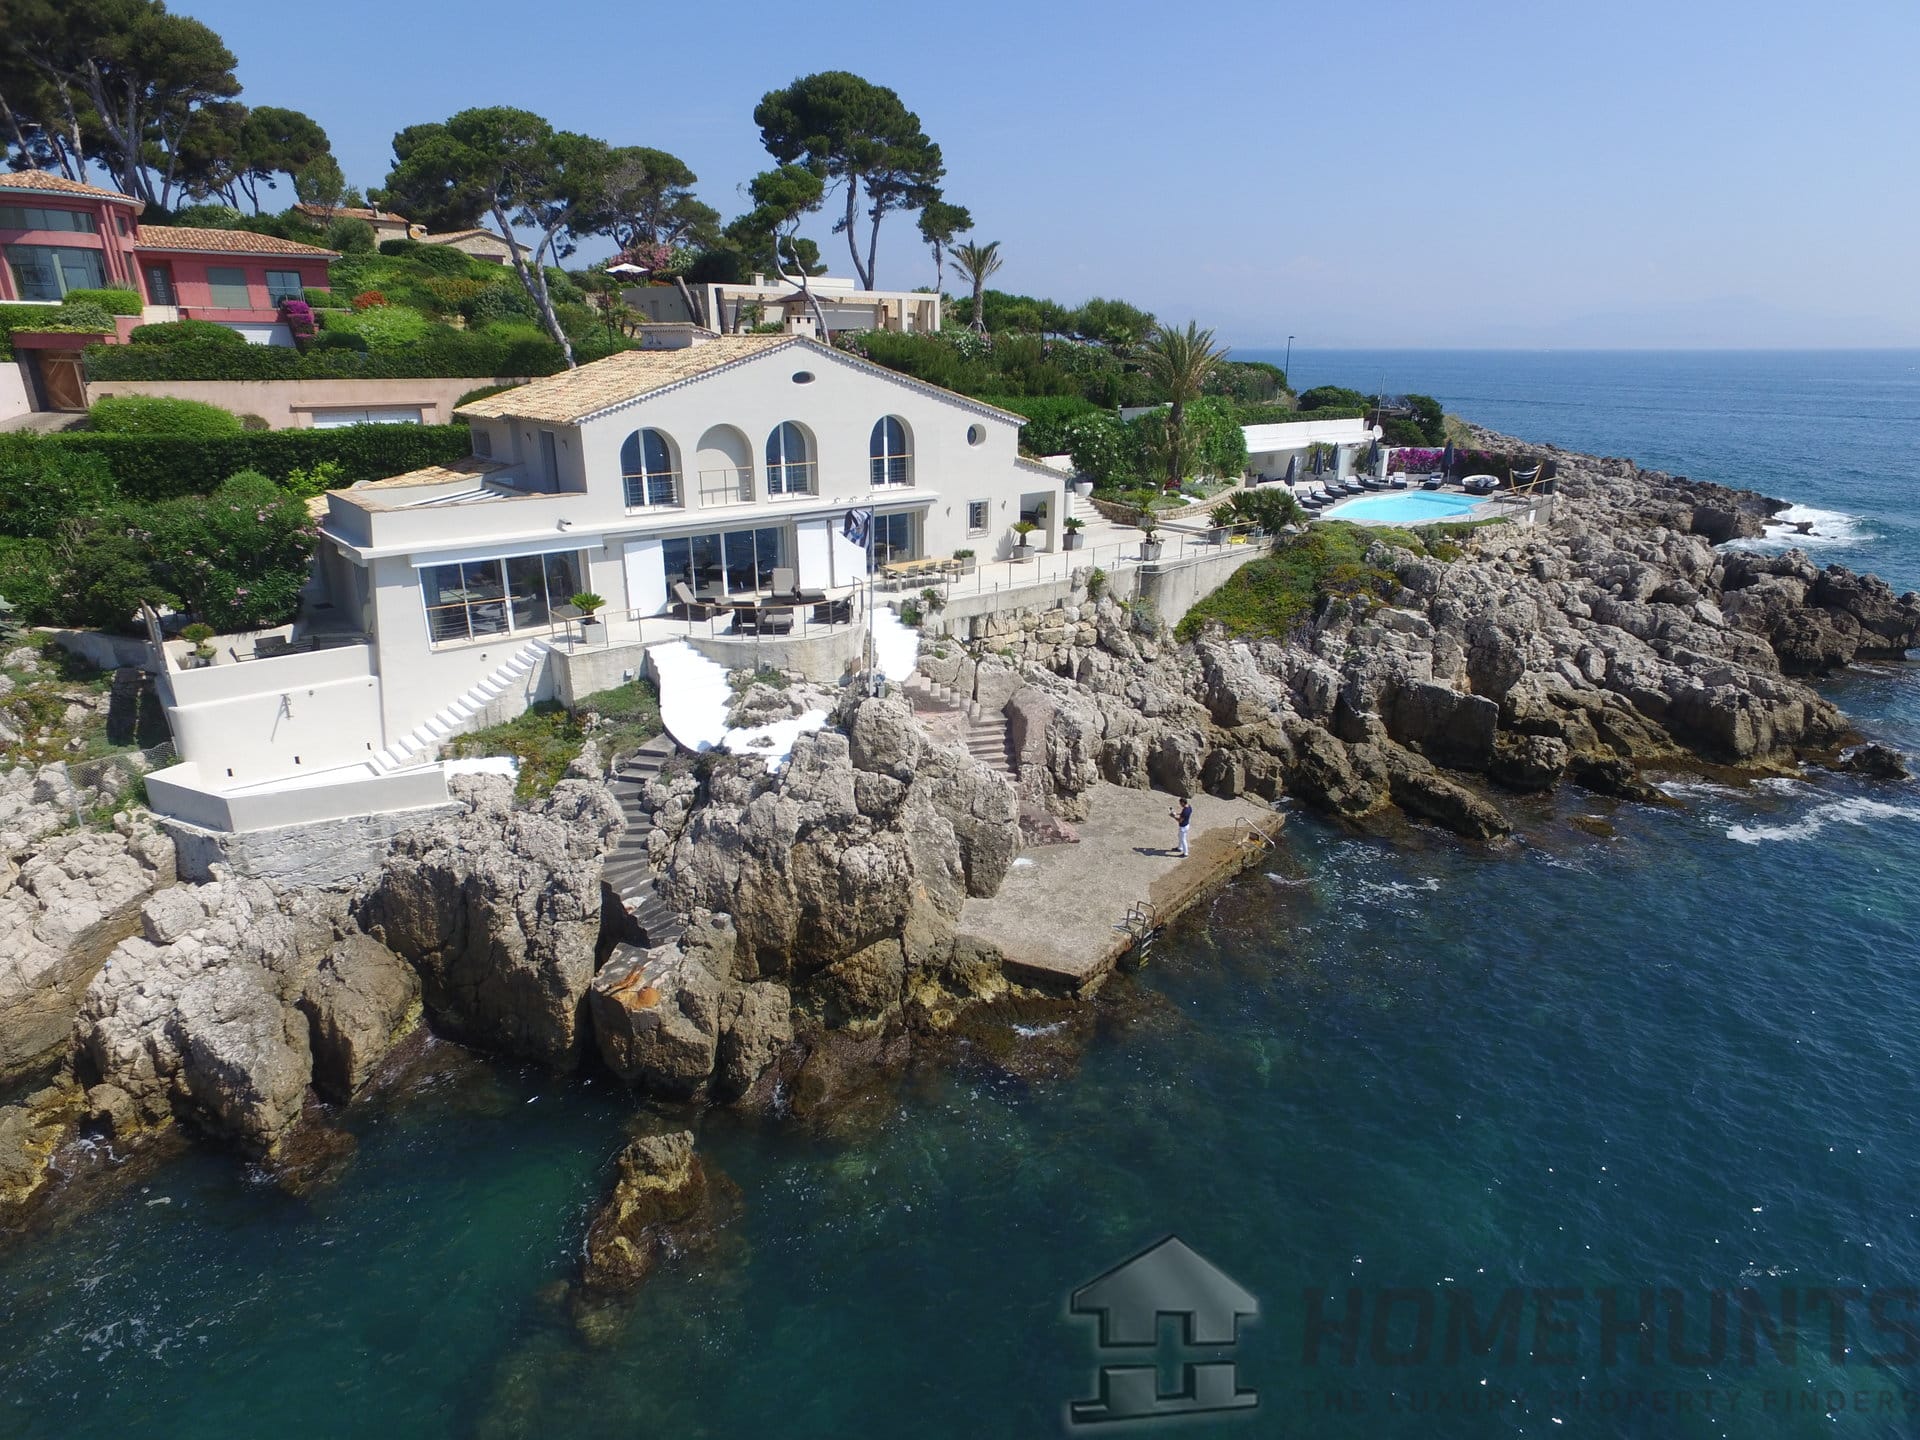 Villa/House For Sale in Cap D Antibes 11